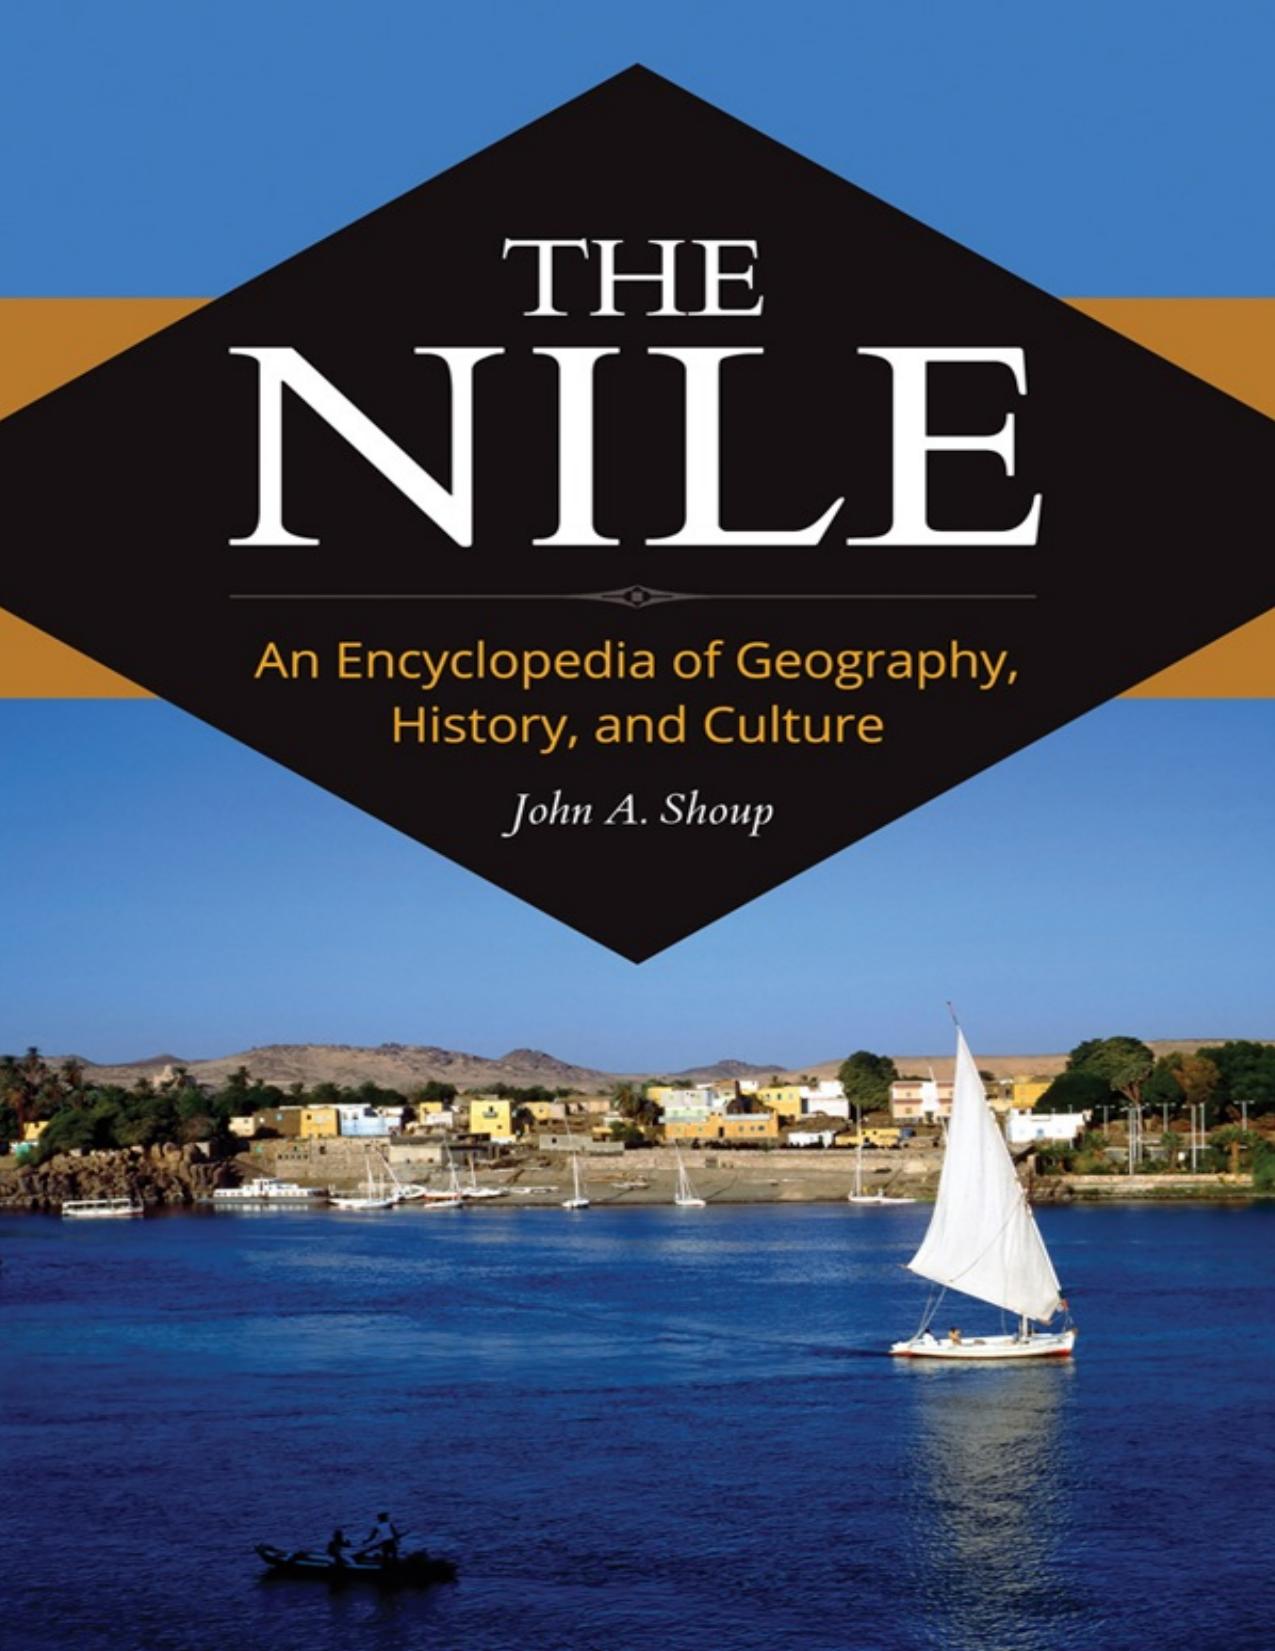 The Nile: An Encyclopedia of Geography, History, and Culture - PDFDrive.com